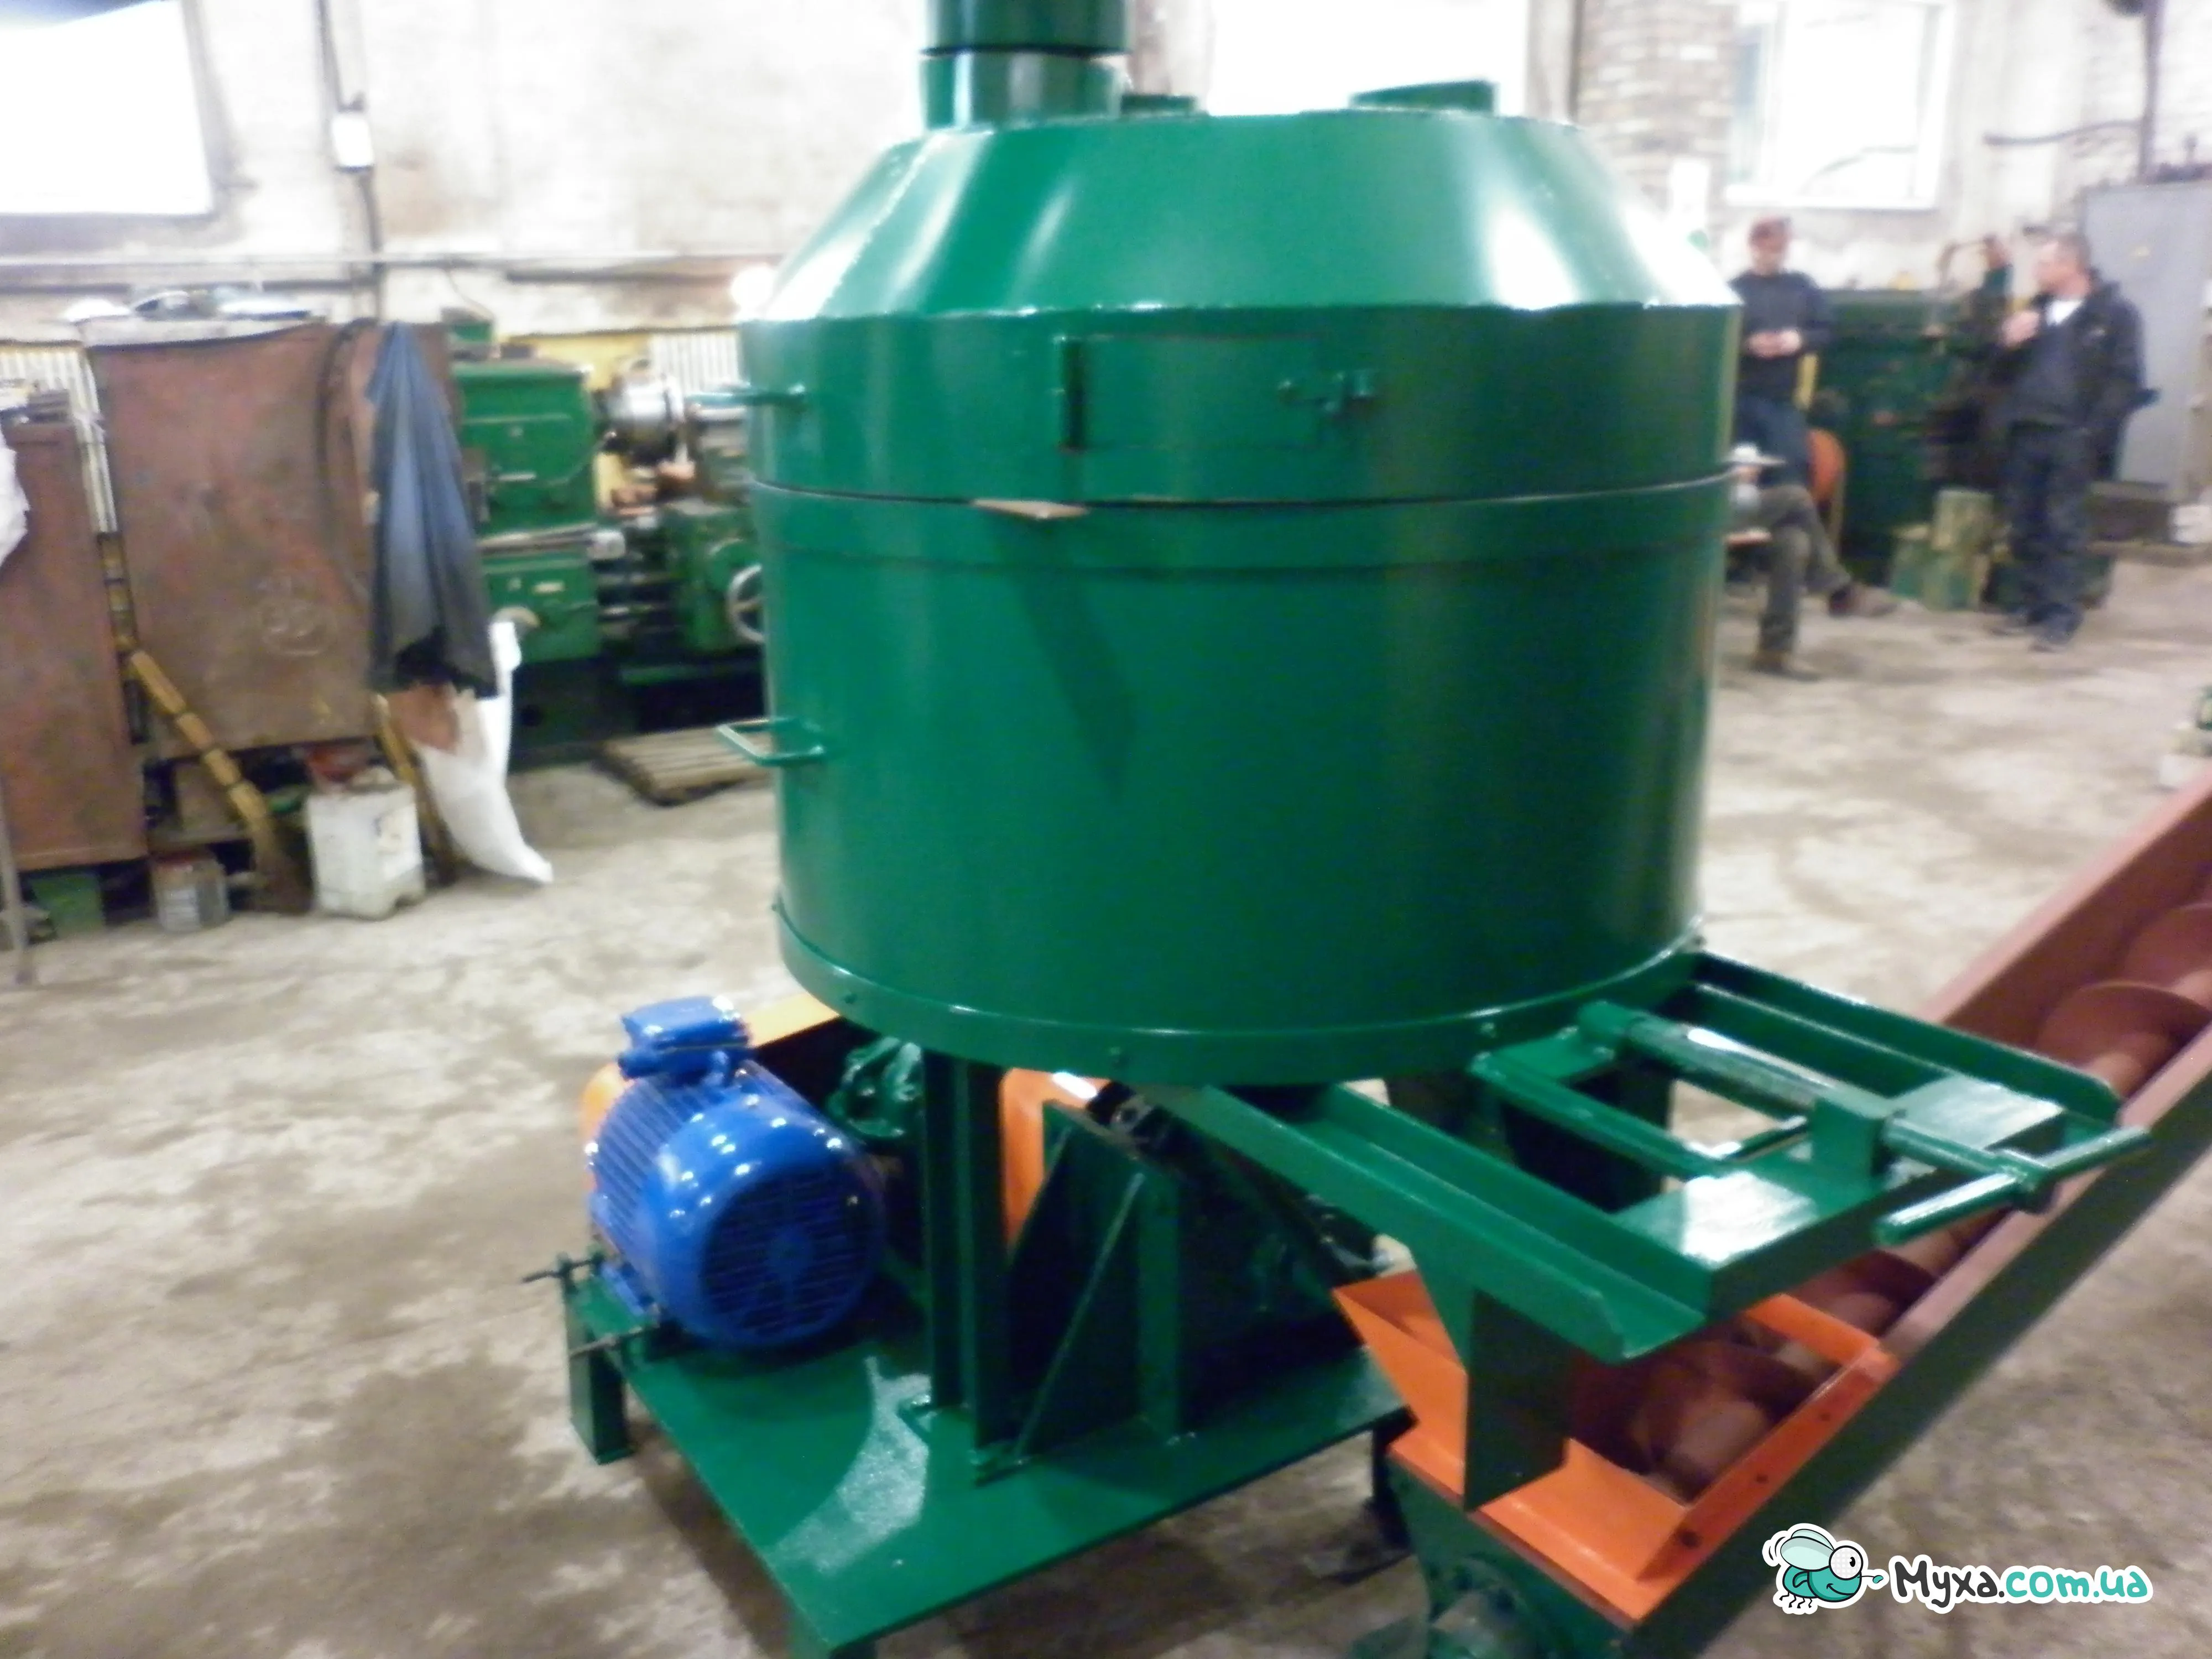 Sliding mixer SB-1000 for preparation of molding sands in foundry